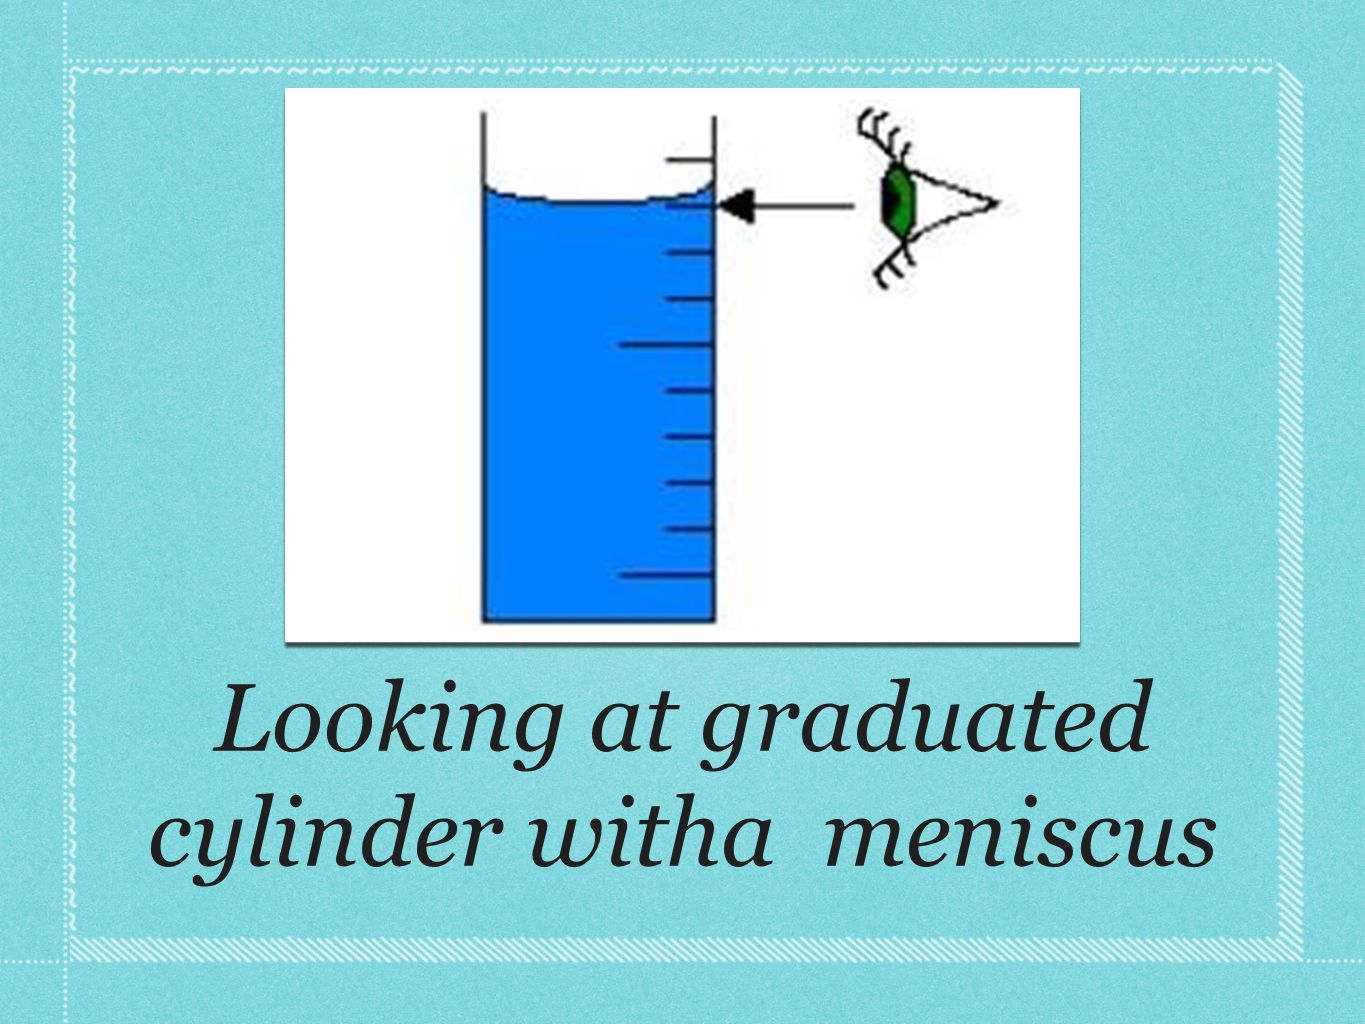 Looking at graduated cylinder witha meniscus